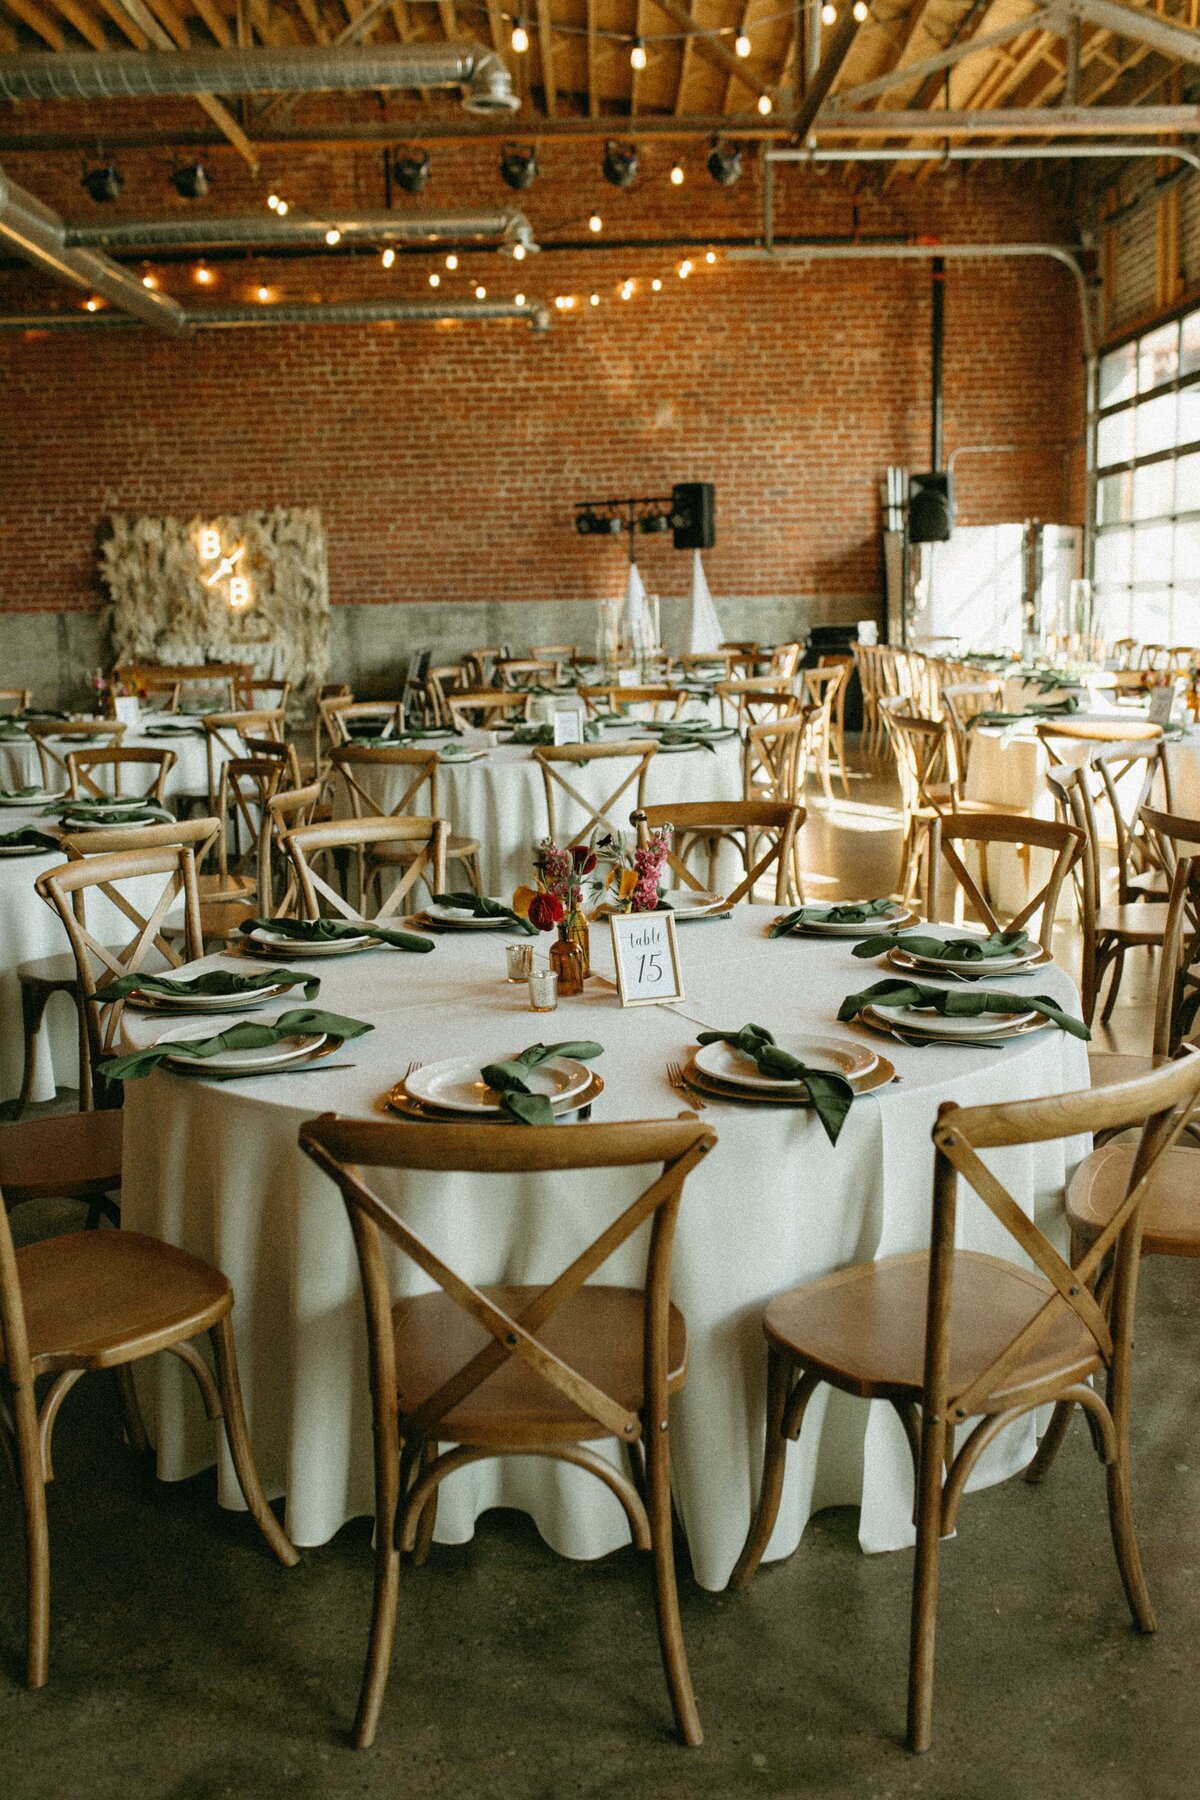 Rustic wedding reception setup in a brick-walled venue with wooden tables, cross-back chairs, and string lights overhead, coordinated by a top wedding planner from Des Moines.